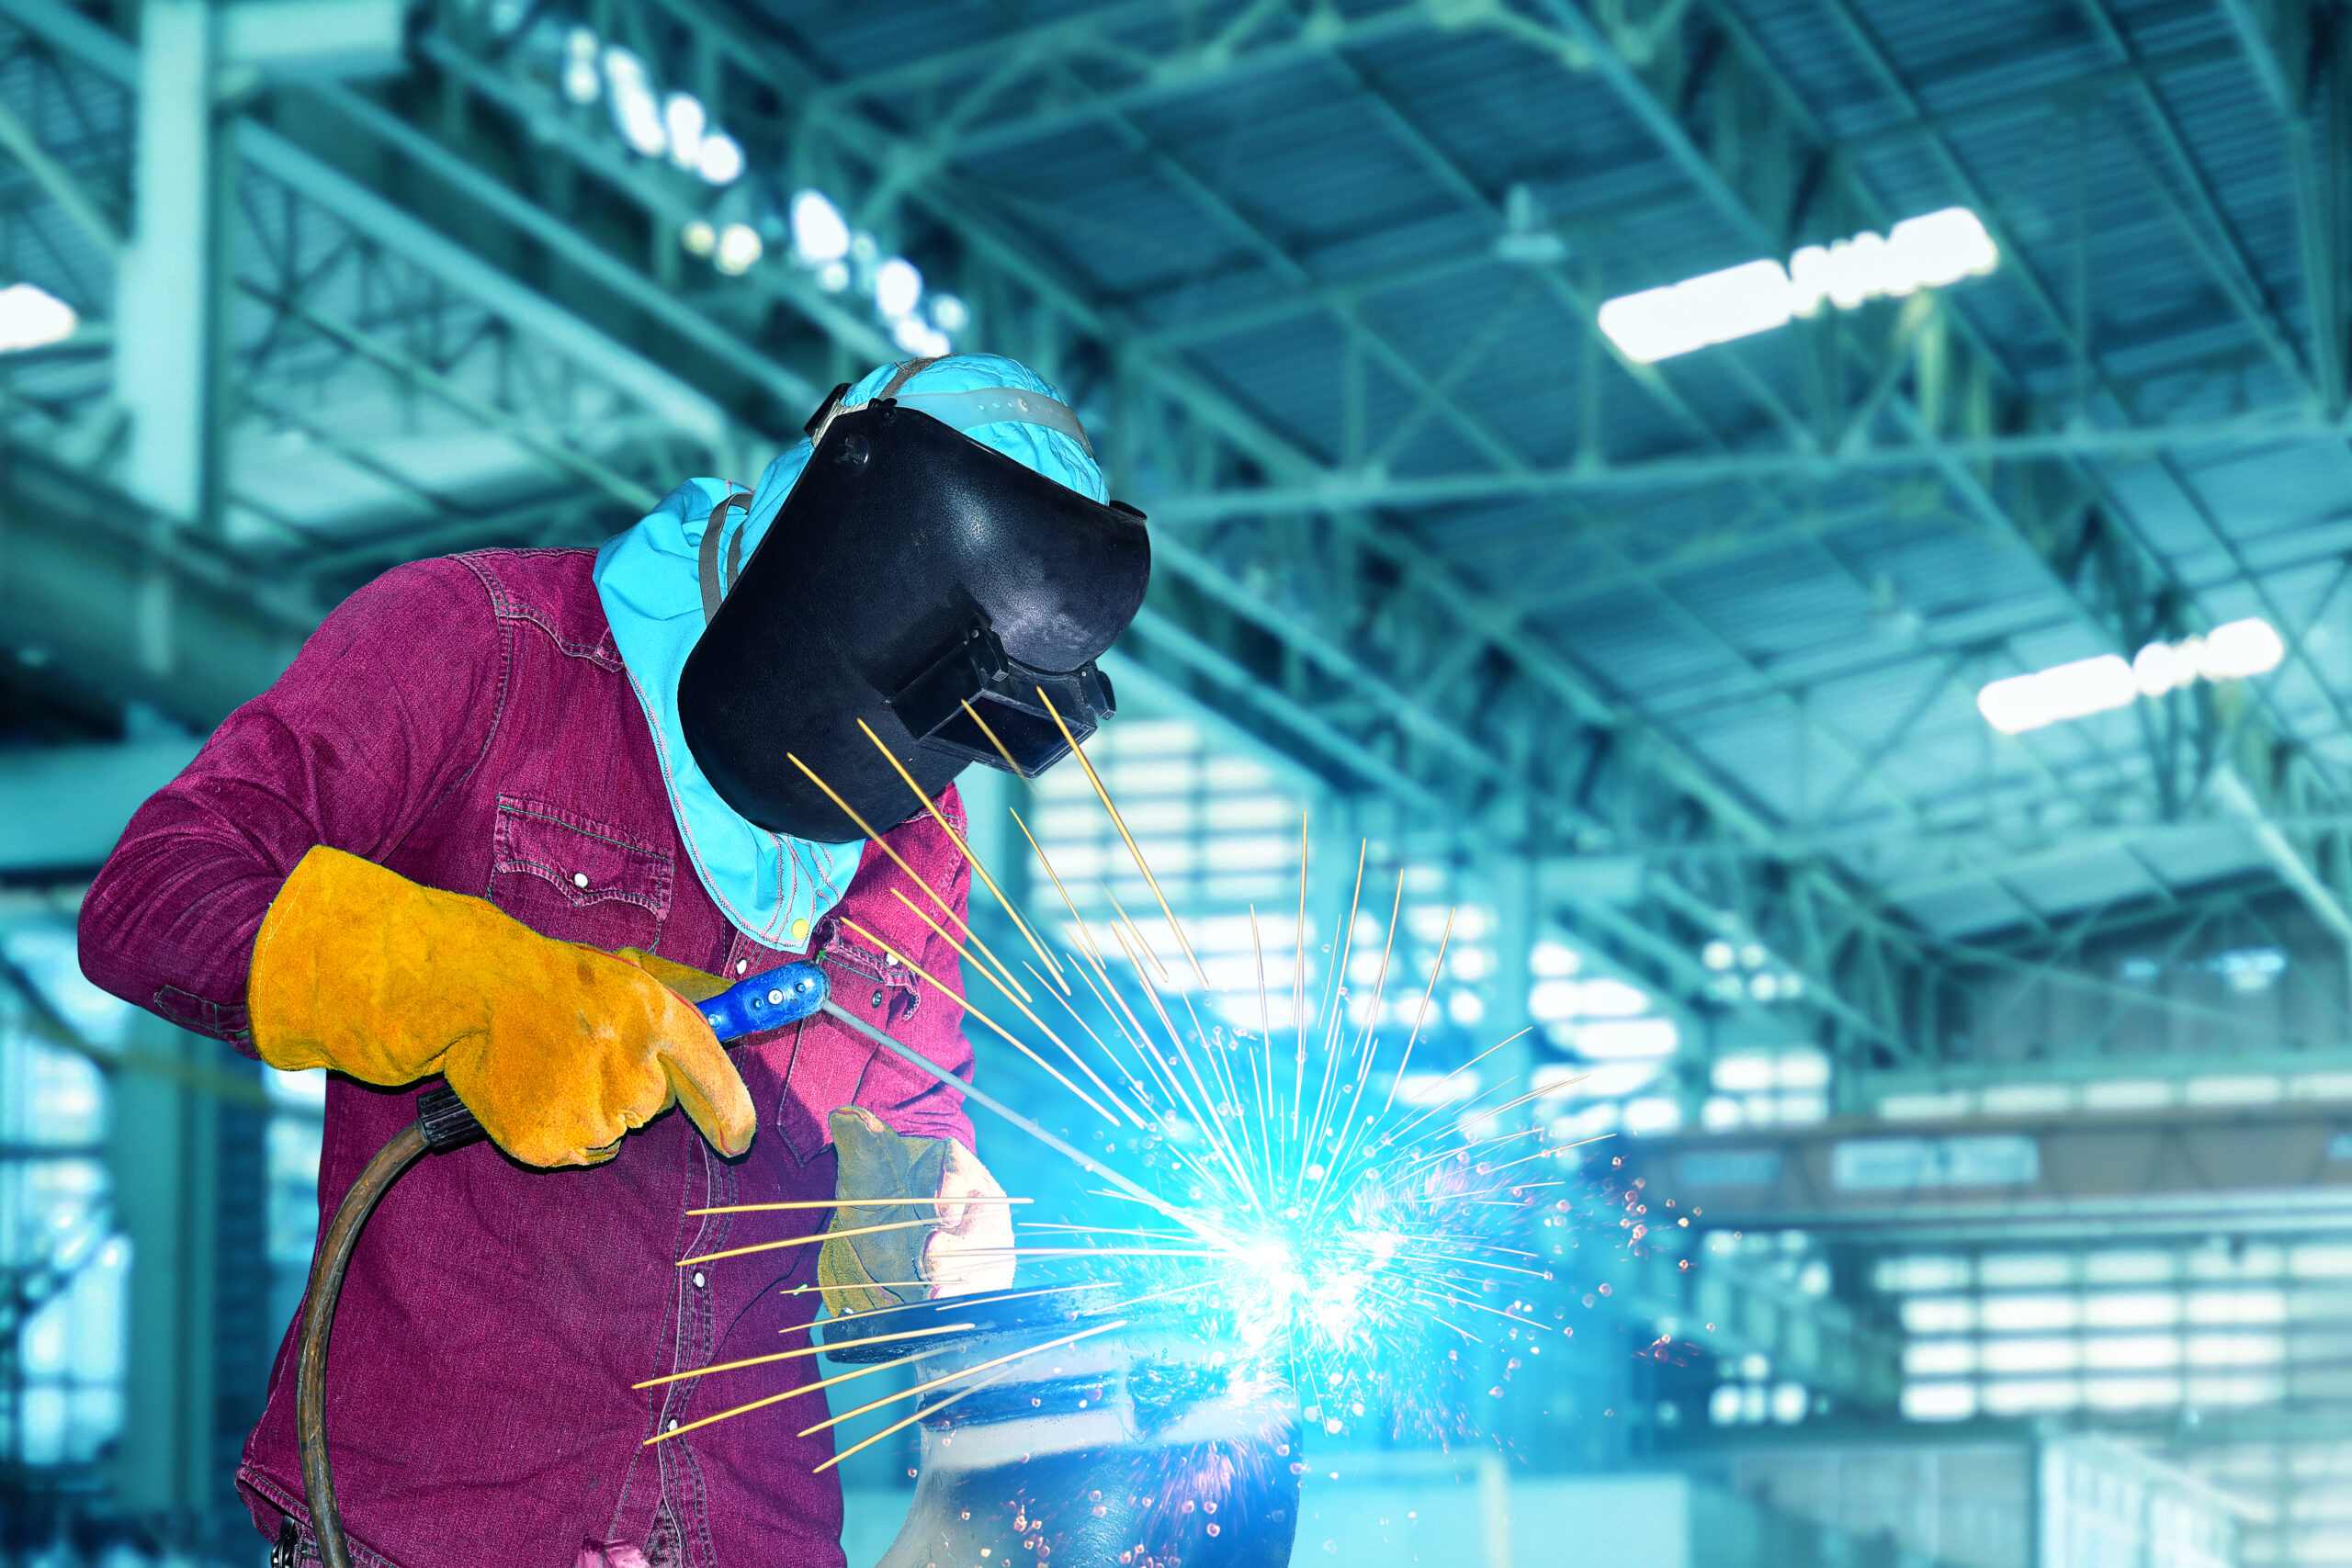 Welder,In,Industrial,Worker,With,Welding,Tool,With,Sparks,Light